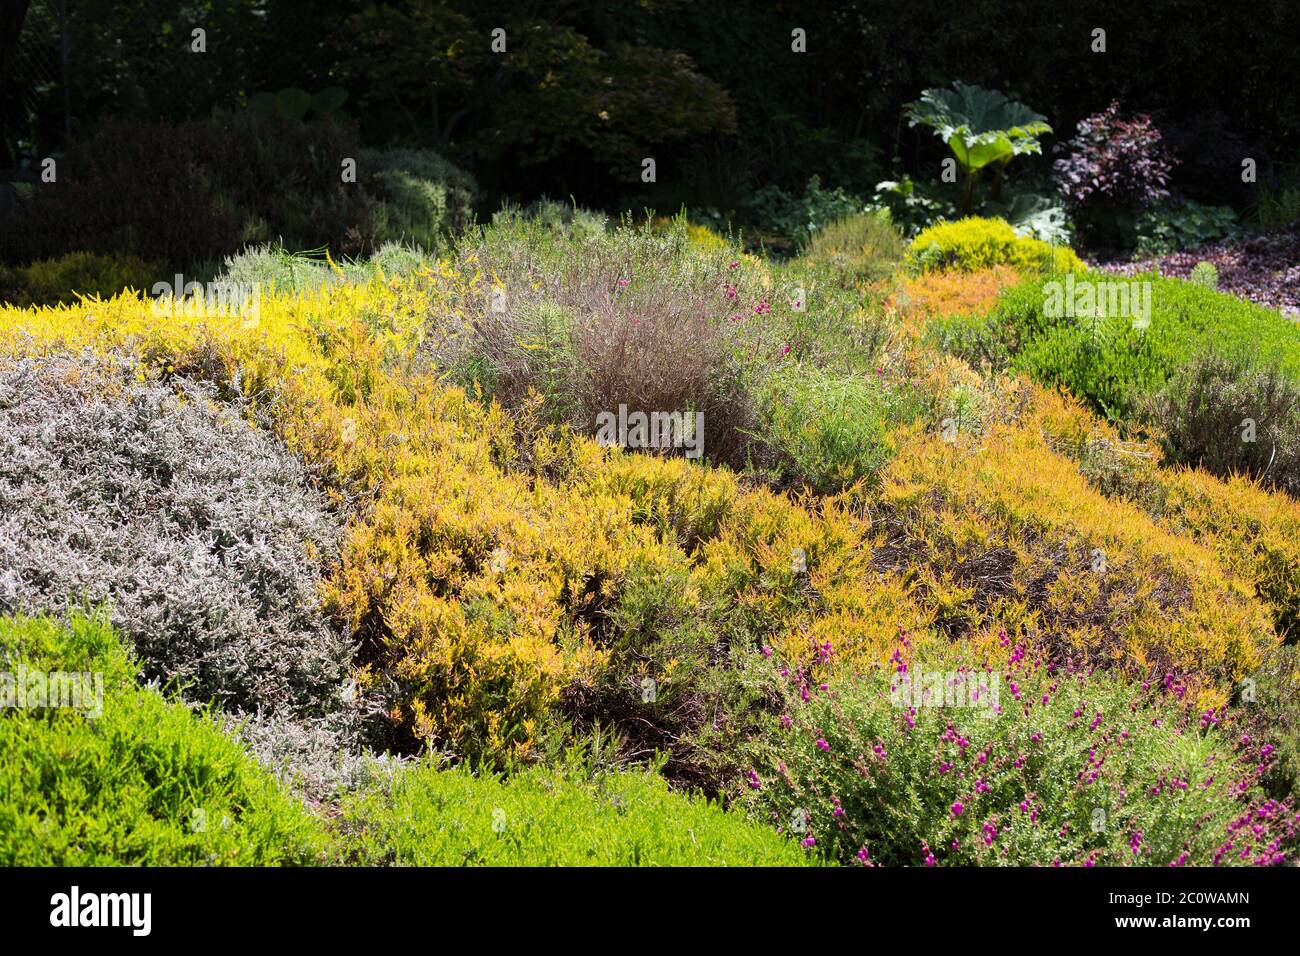 A heather bed in a garden. Stock Photo